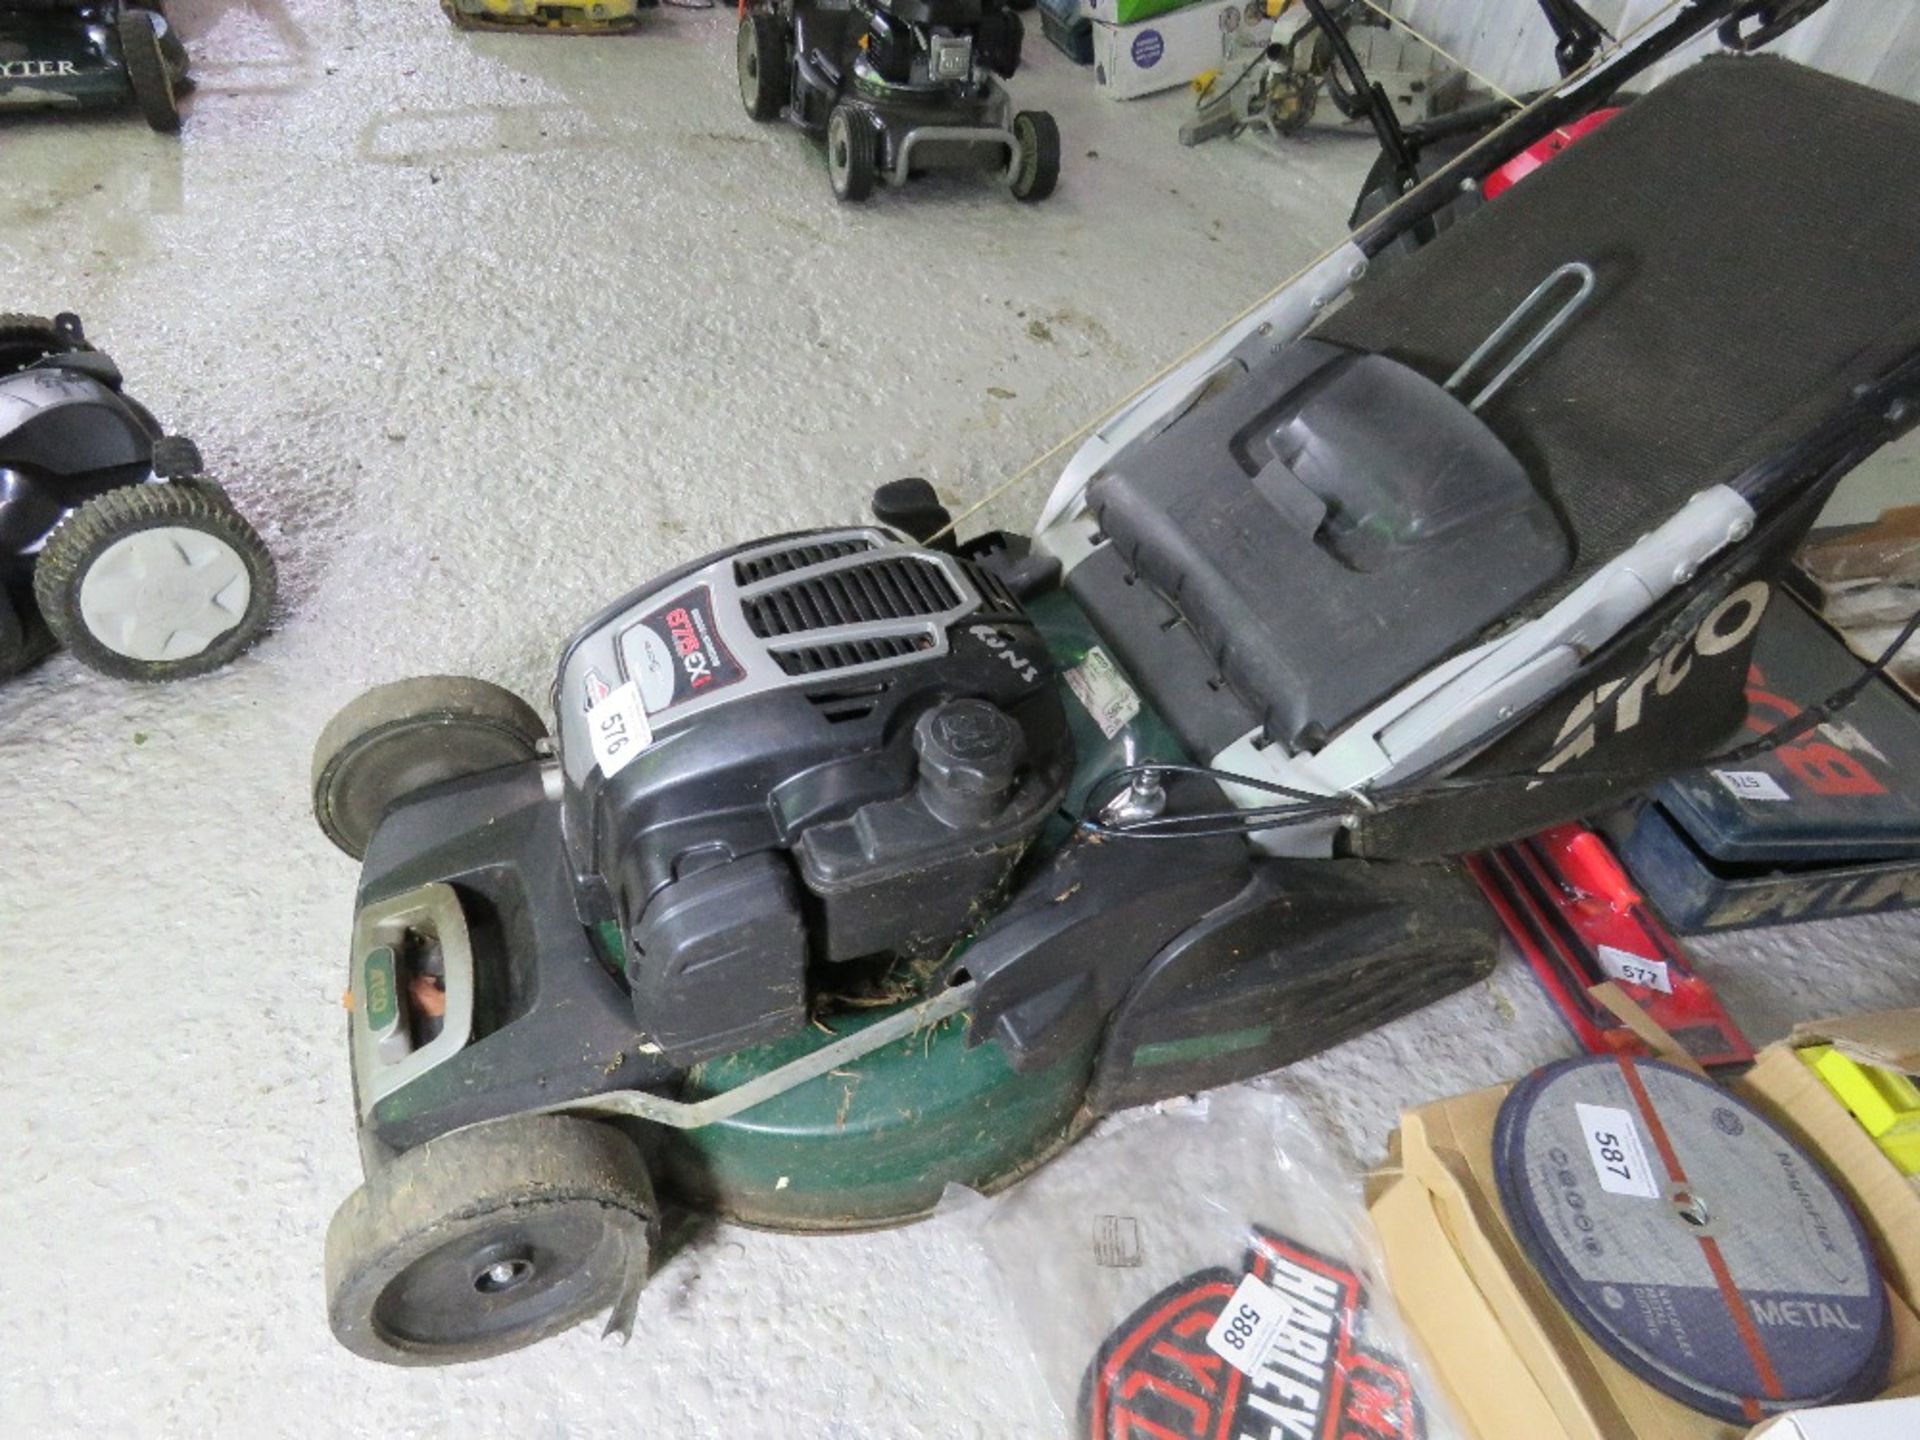 ATCO ROLLER MOWER WITH A COLLECTOR. WHEN TESTED WAS SEEN TO RUN. THIS LOT IS SOLD UNDER THE AUCTION - Image 5 of 5